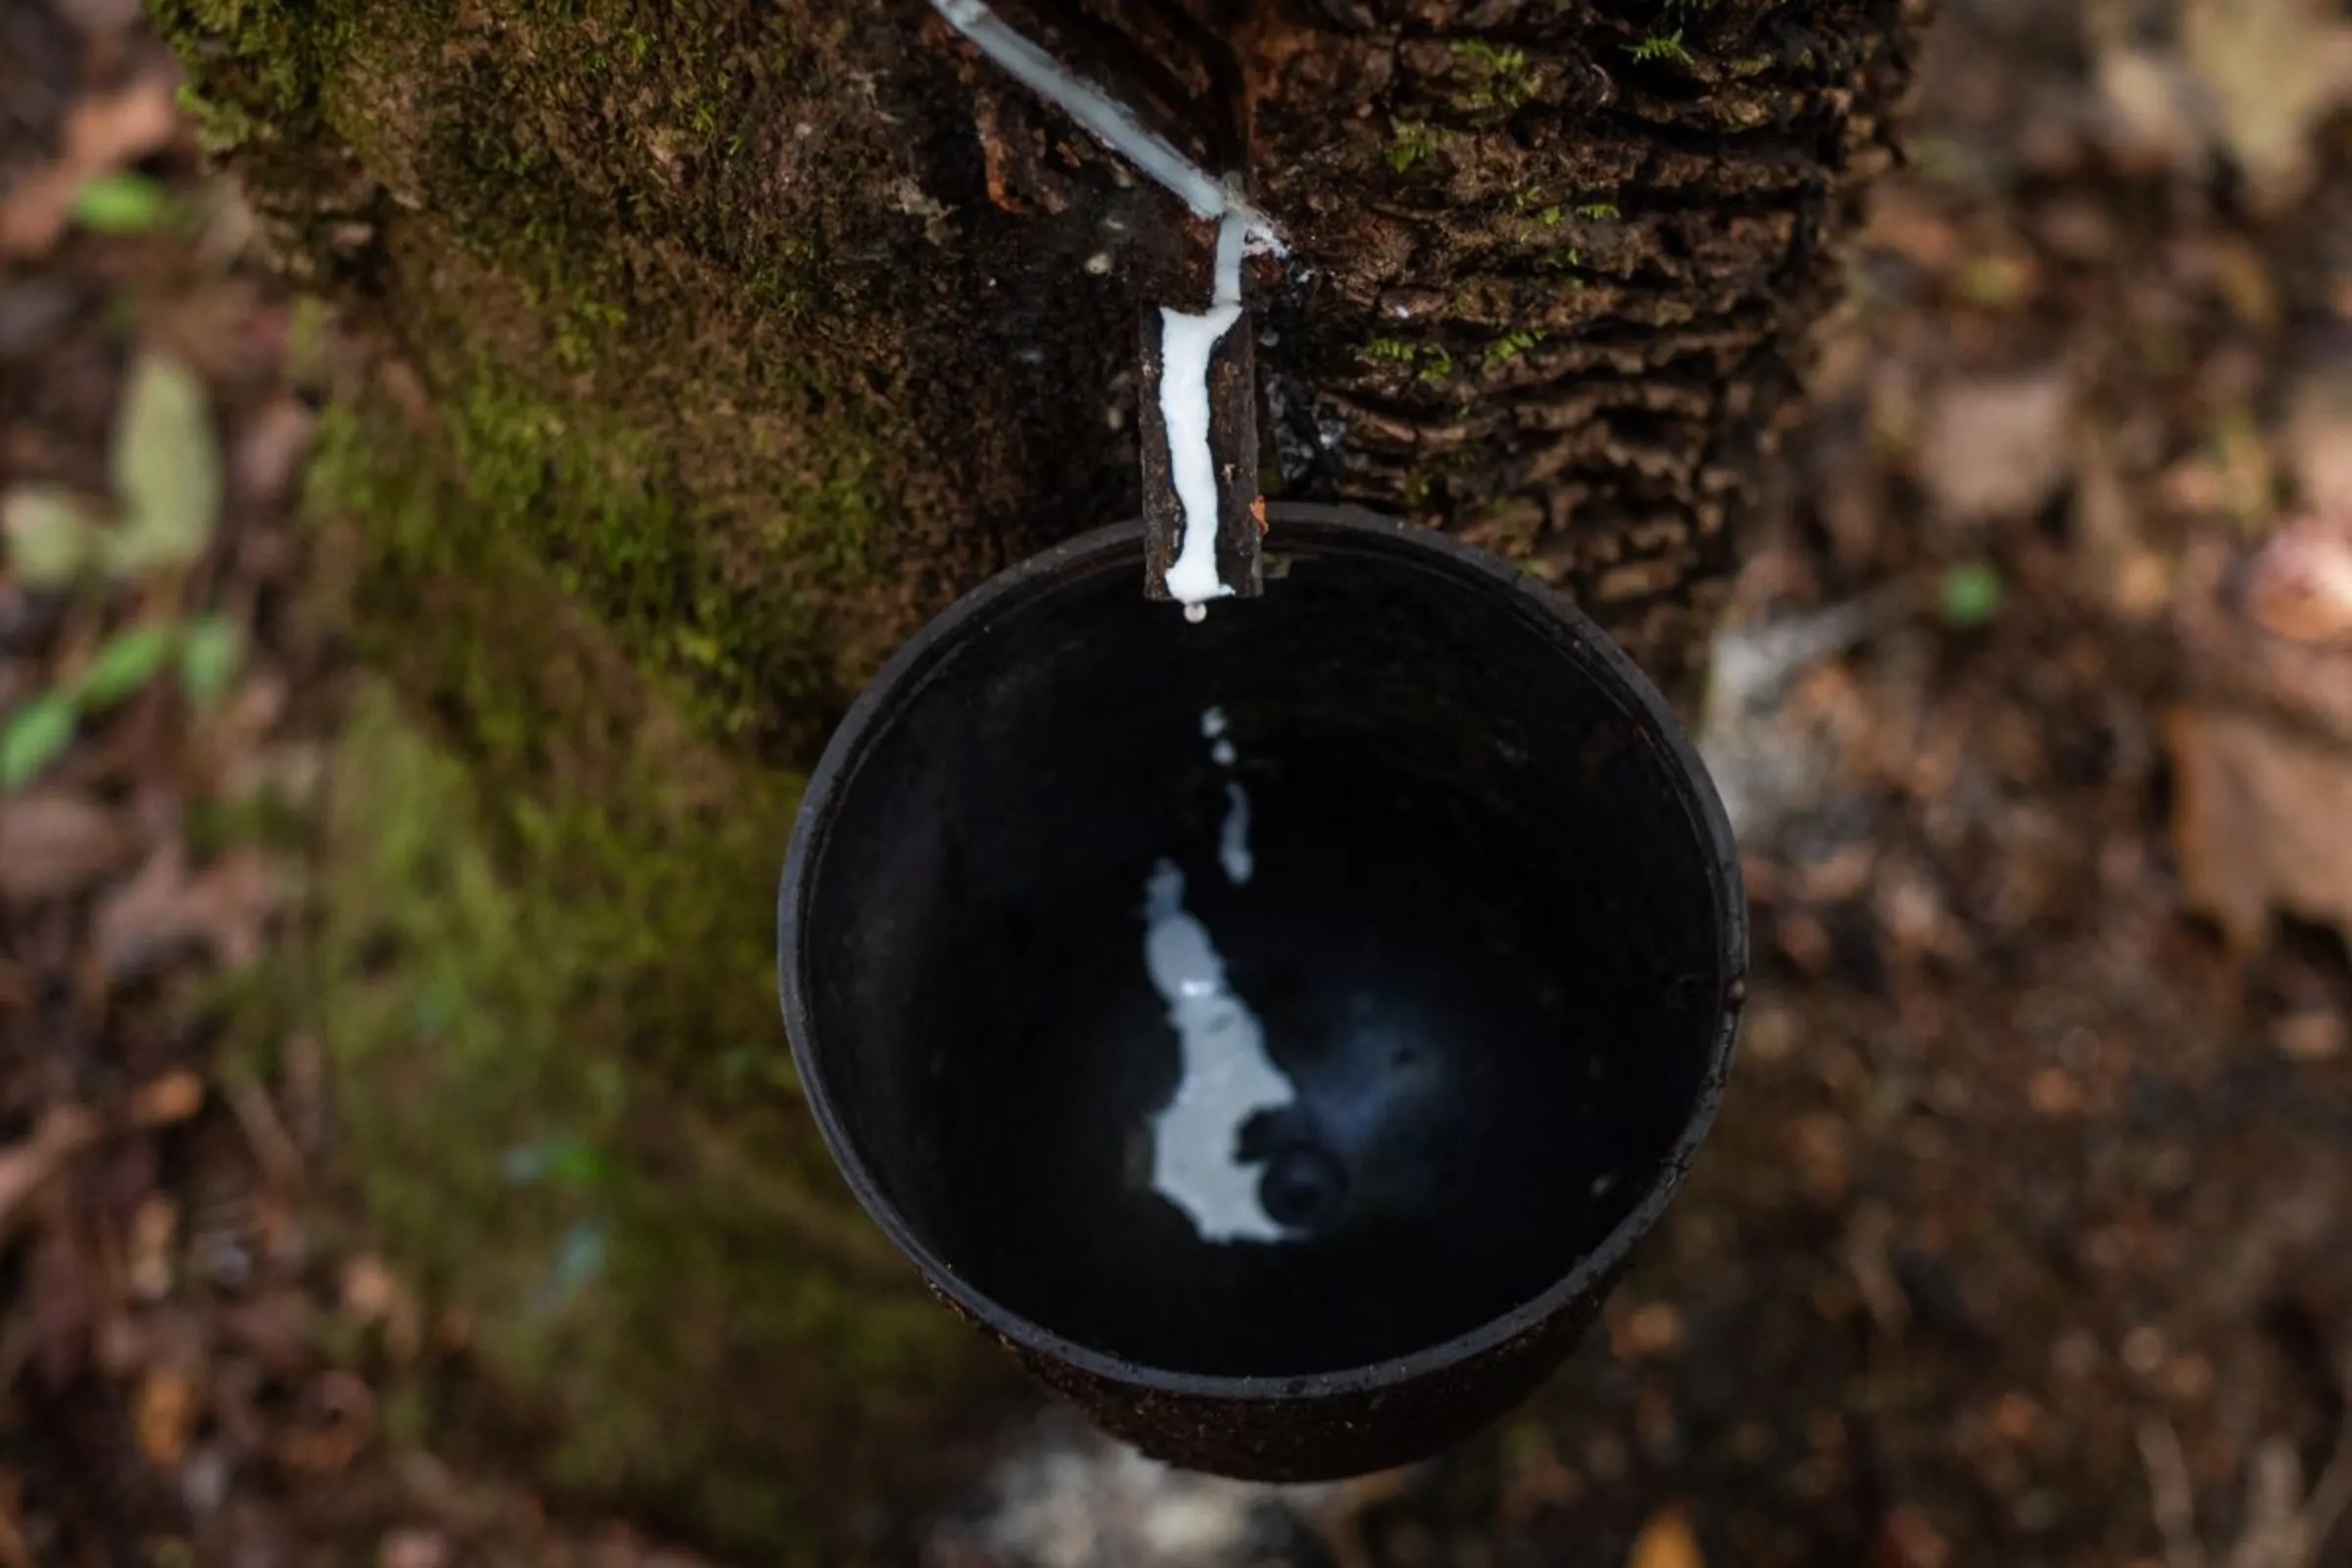 Latex from a rubber tree is collected in a bucket in Pará, Brazil, January 17, 2023. Thomson Reuters Foundation/Cícero Pedrosa Neto